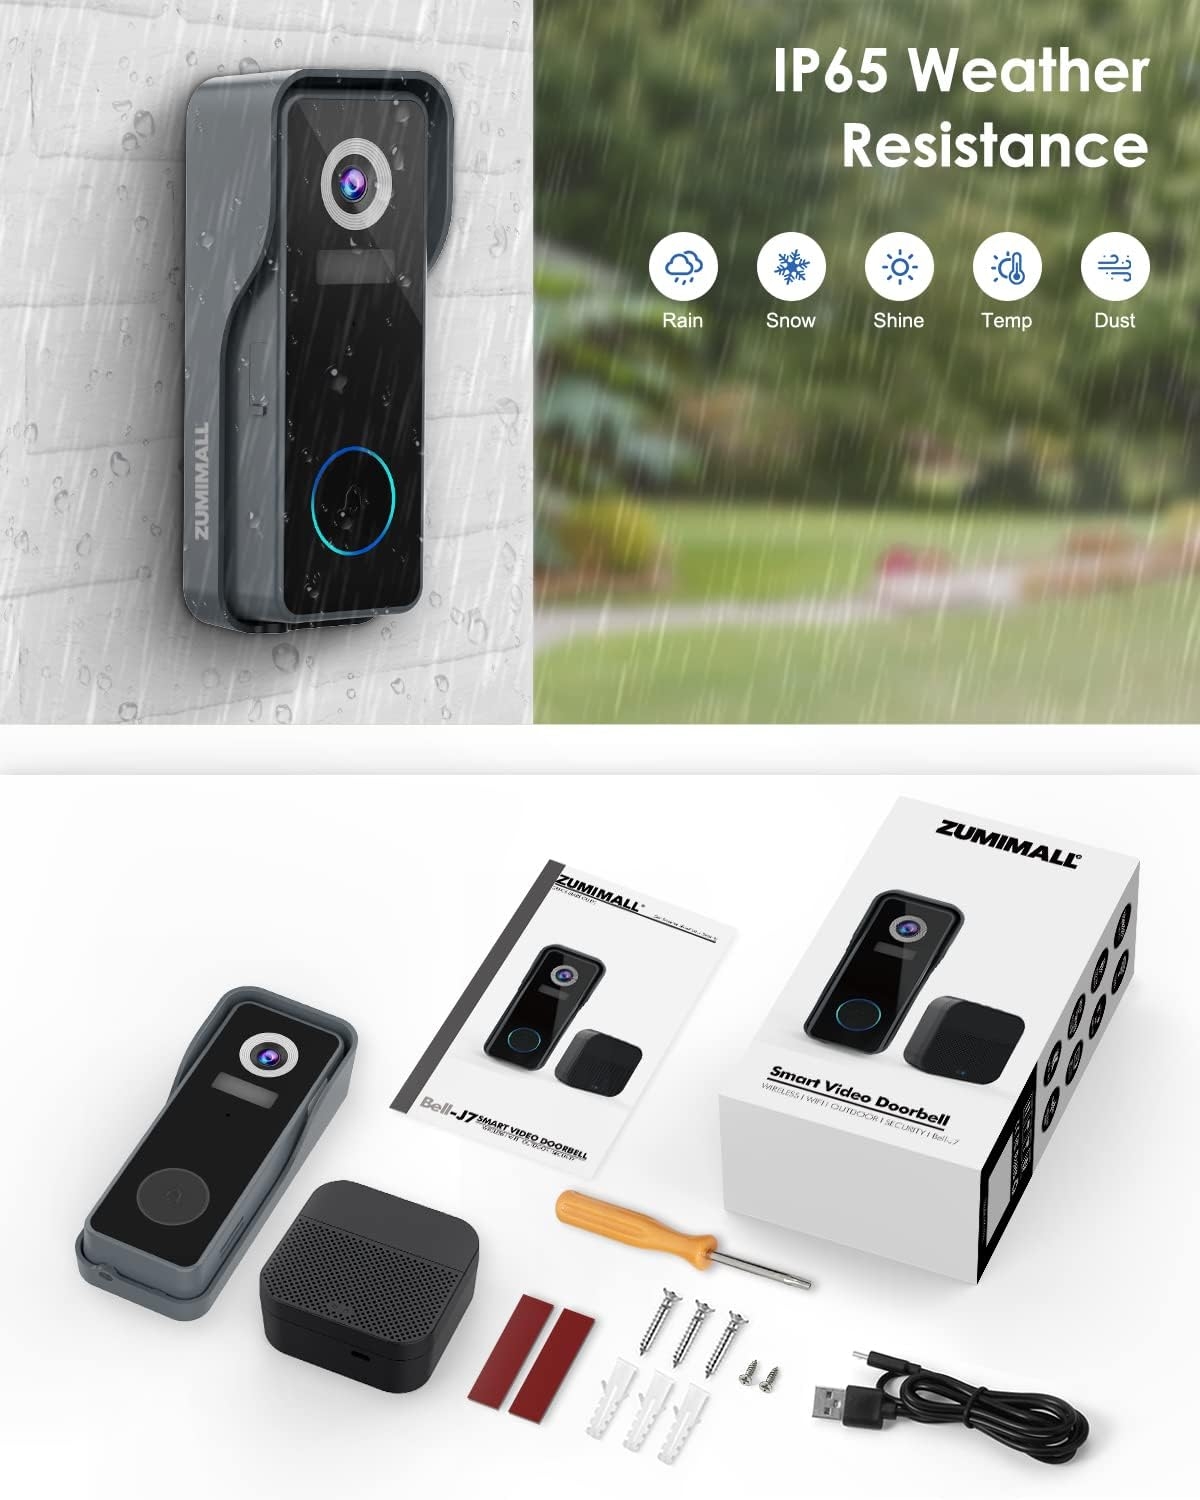 【2021 Upgraded】 ZUMIMALL WiFi Video Doorbell Camera, Wireless Camera Doorbell with Chime, 1080P HD, Motion Detection, Night Vision, 2-Way Audio, Cloud Storage(Optional), 32 GB SD Card Included